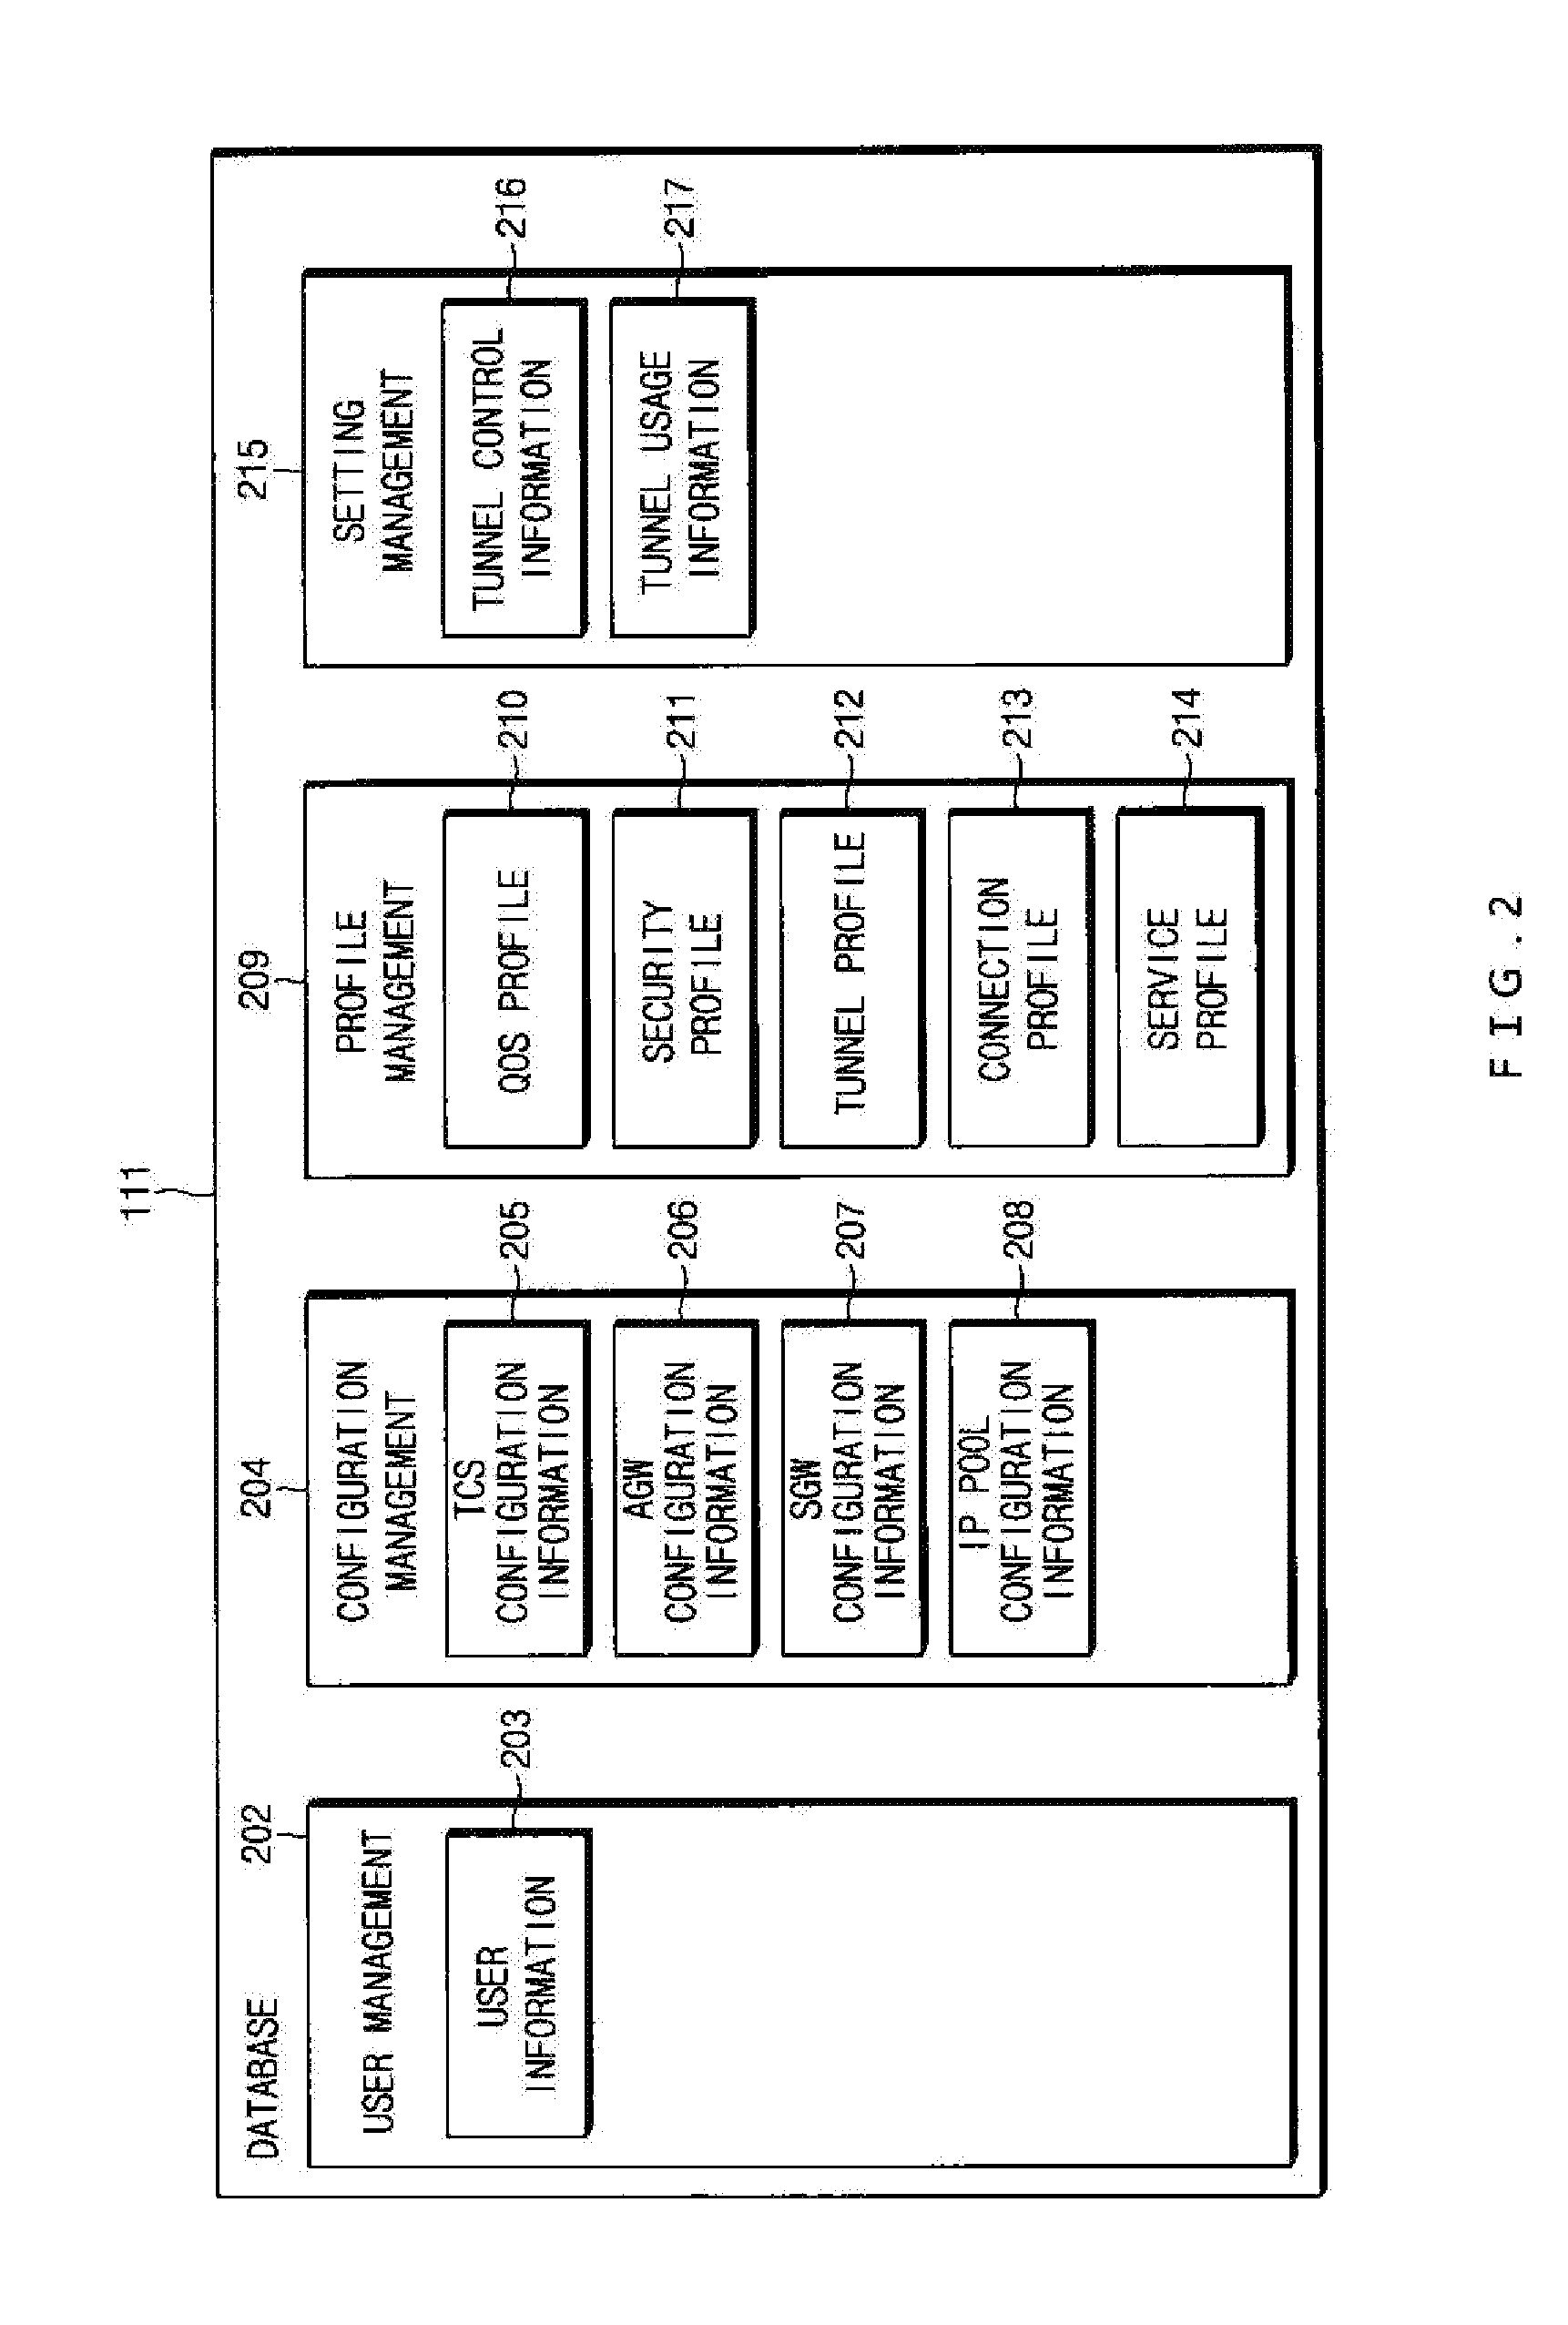 Integrative network management method and apparatus for supplying connection between networks based on policy